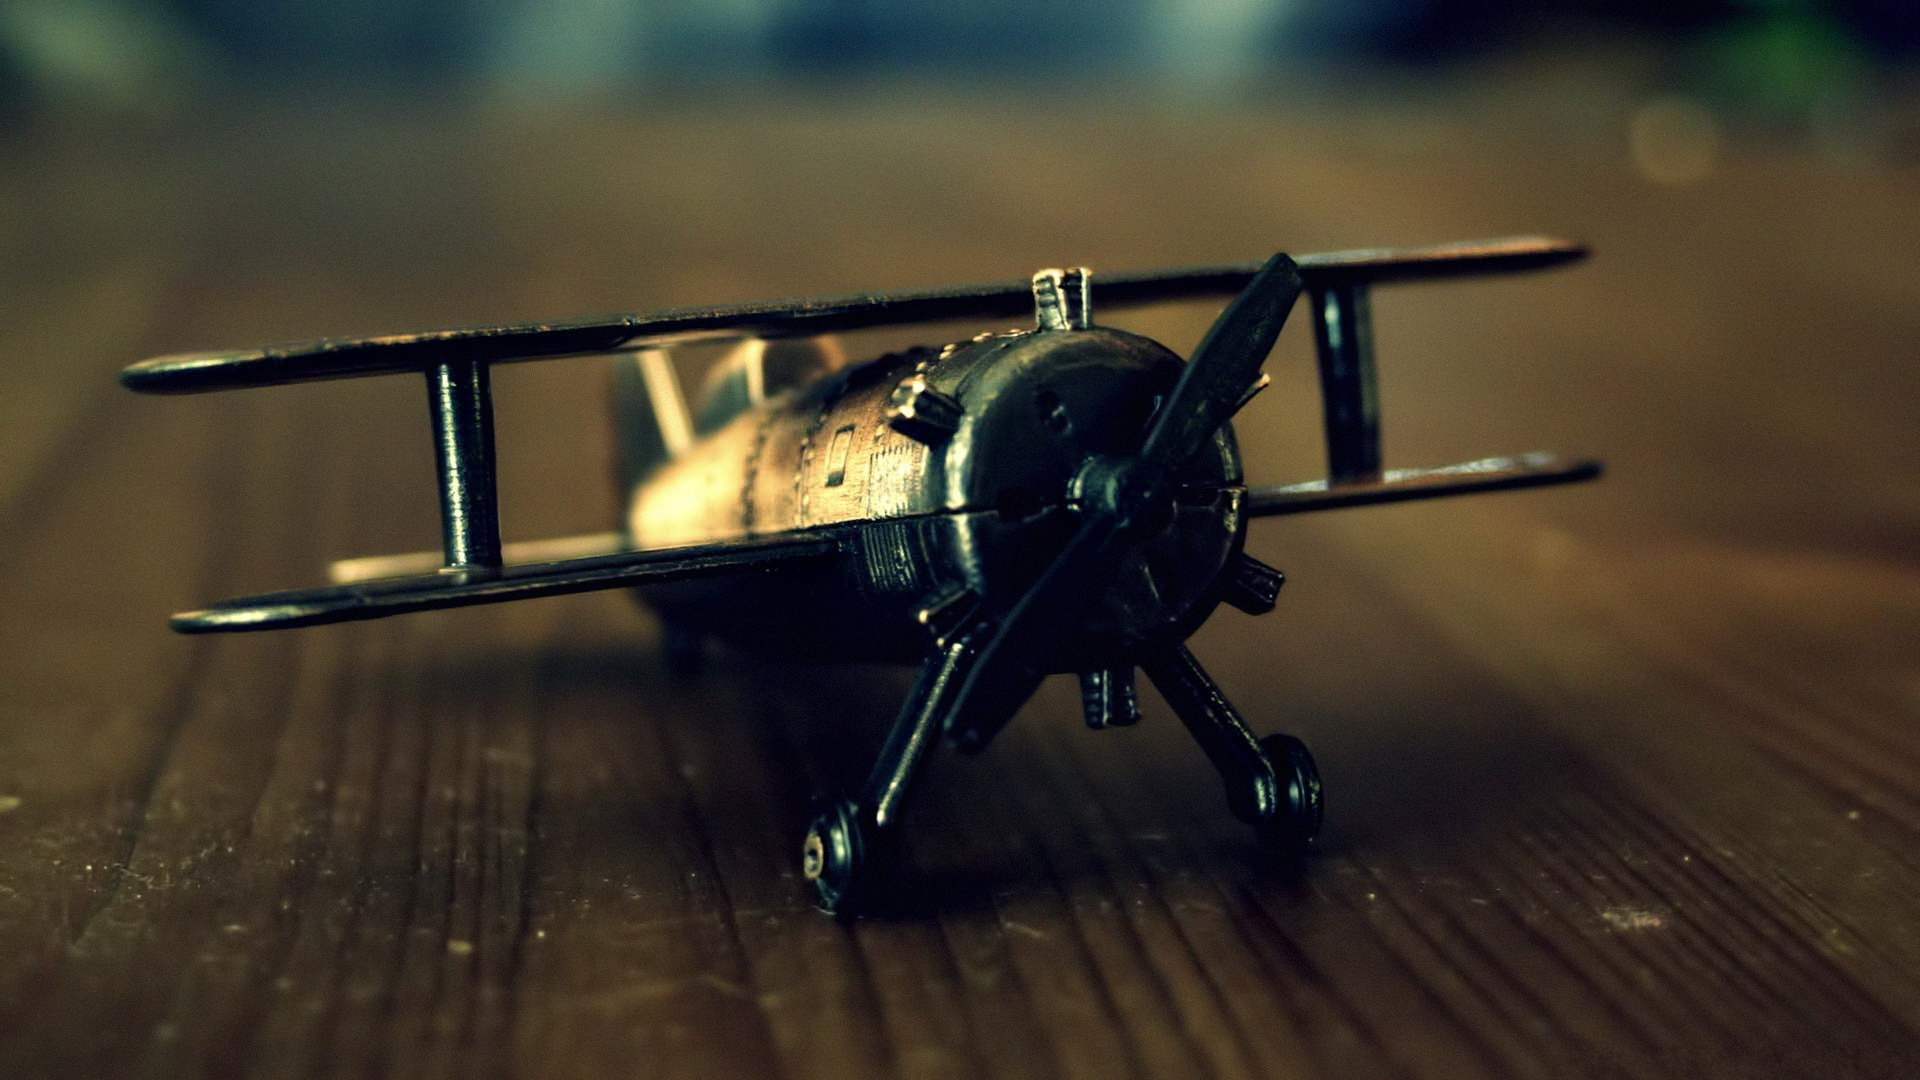 Awesome Toy Plane Wallpaper